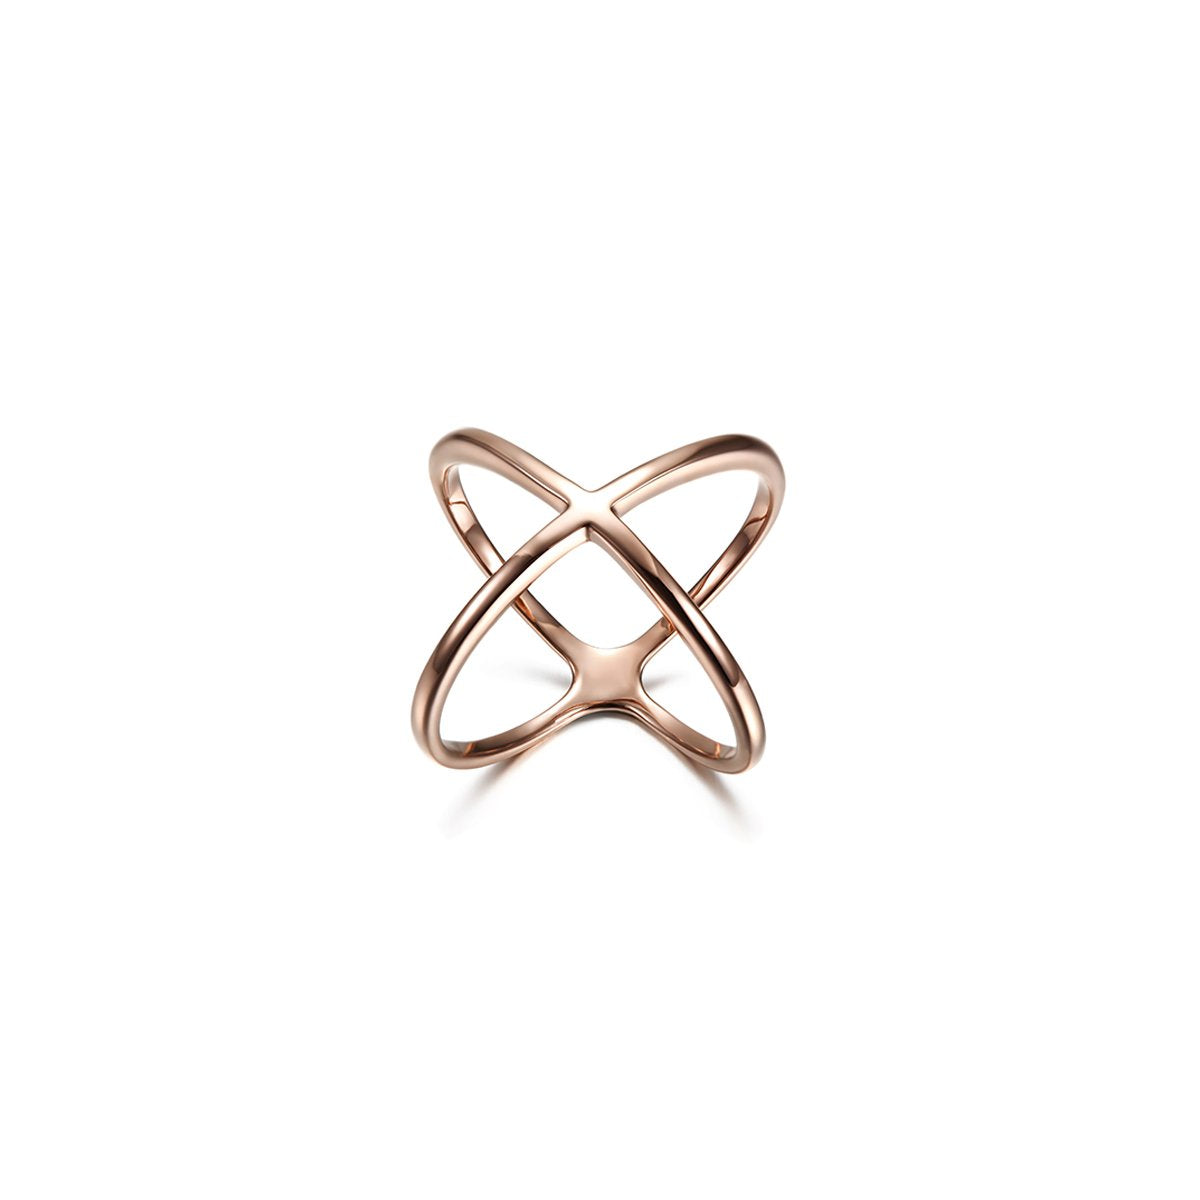 Hypoallergenic Rose Gold Crisscross Band Ring - Statement Fashion Jewelry for Women - Jewelry & Watches - Bijou Her -  -  - 